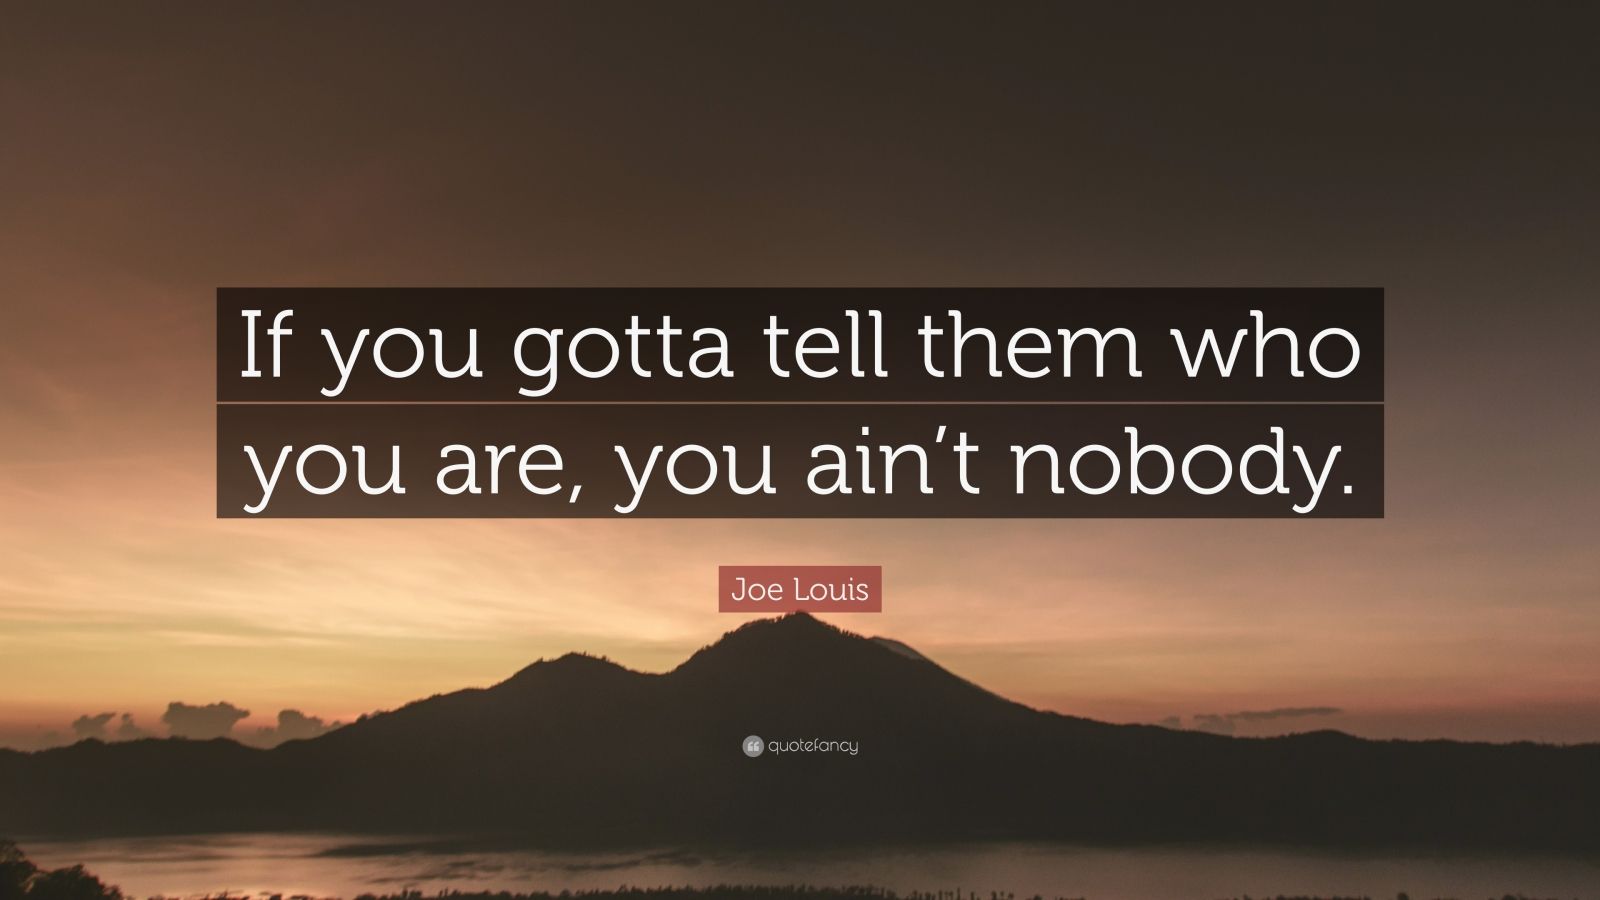 Joe Louis Quote: "If you gotta tell them who you are, you ain't nobody." (7 wallpapers) - Quotefancy